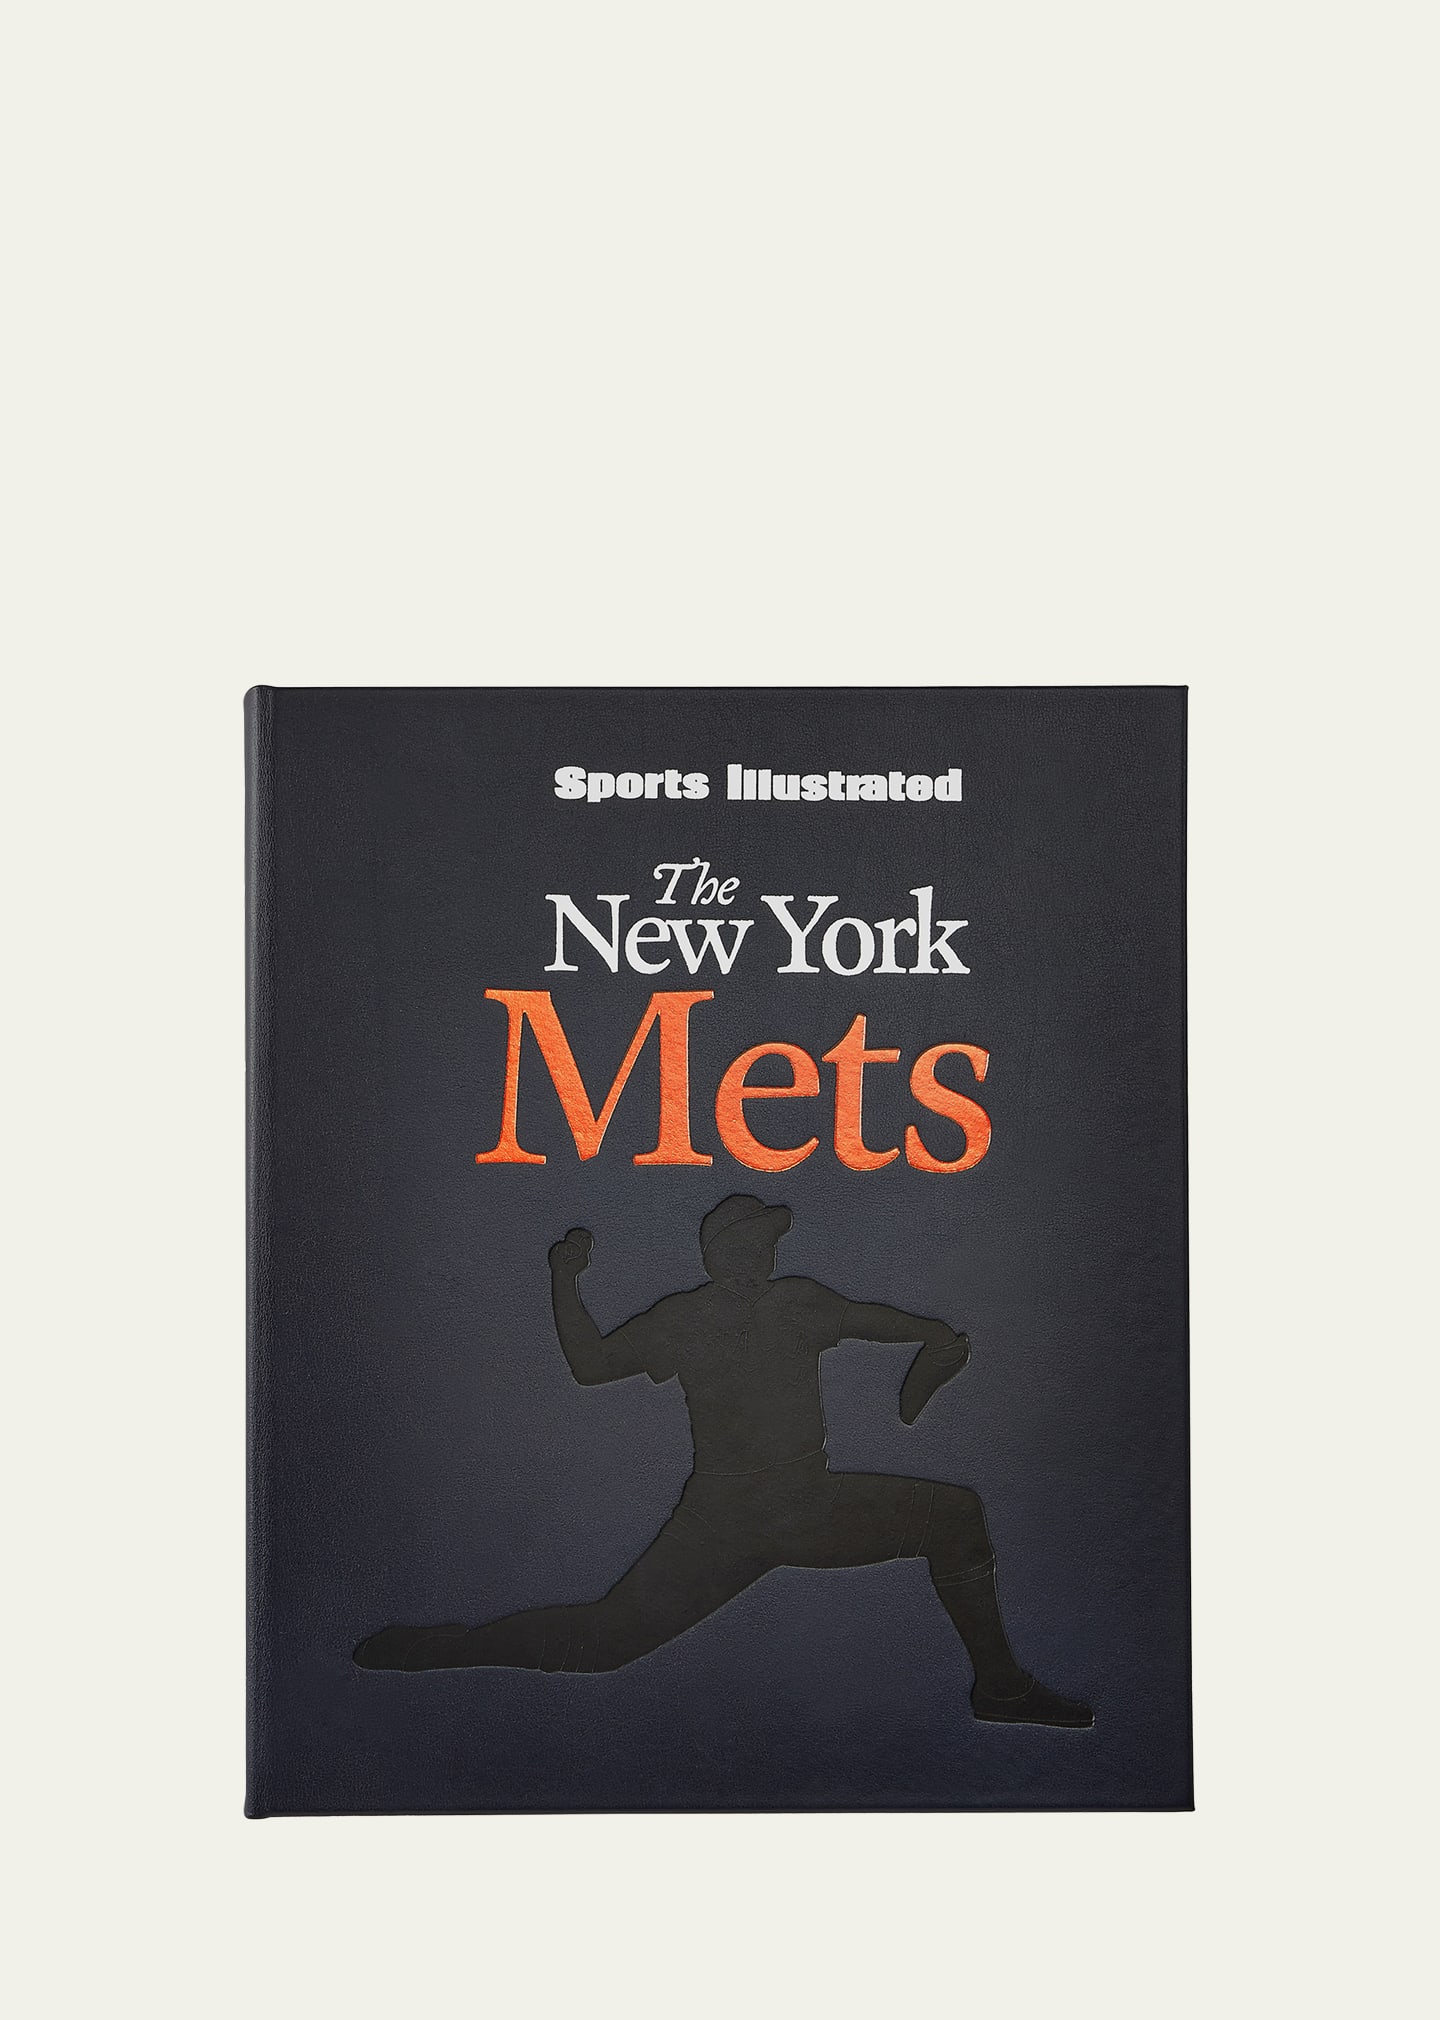 "The New York Mets" Book by Sports Illustrated